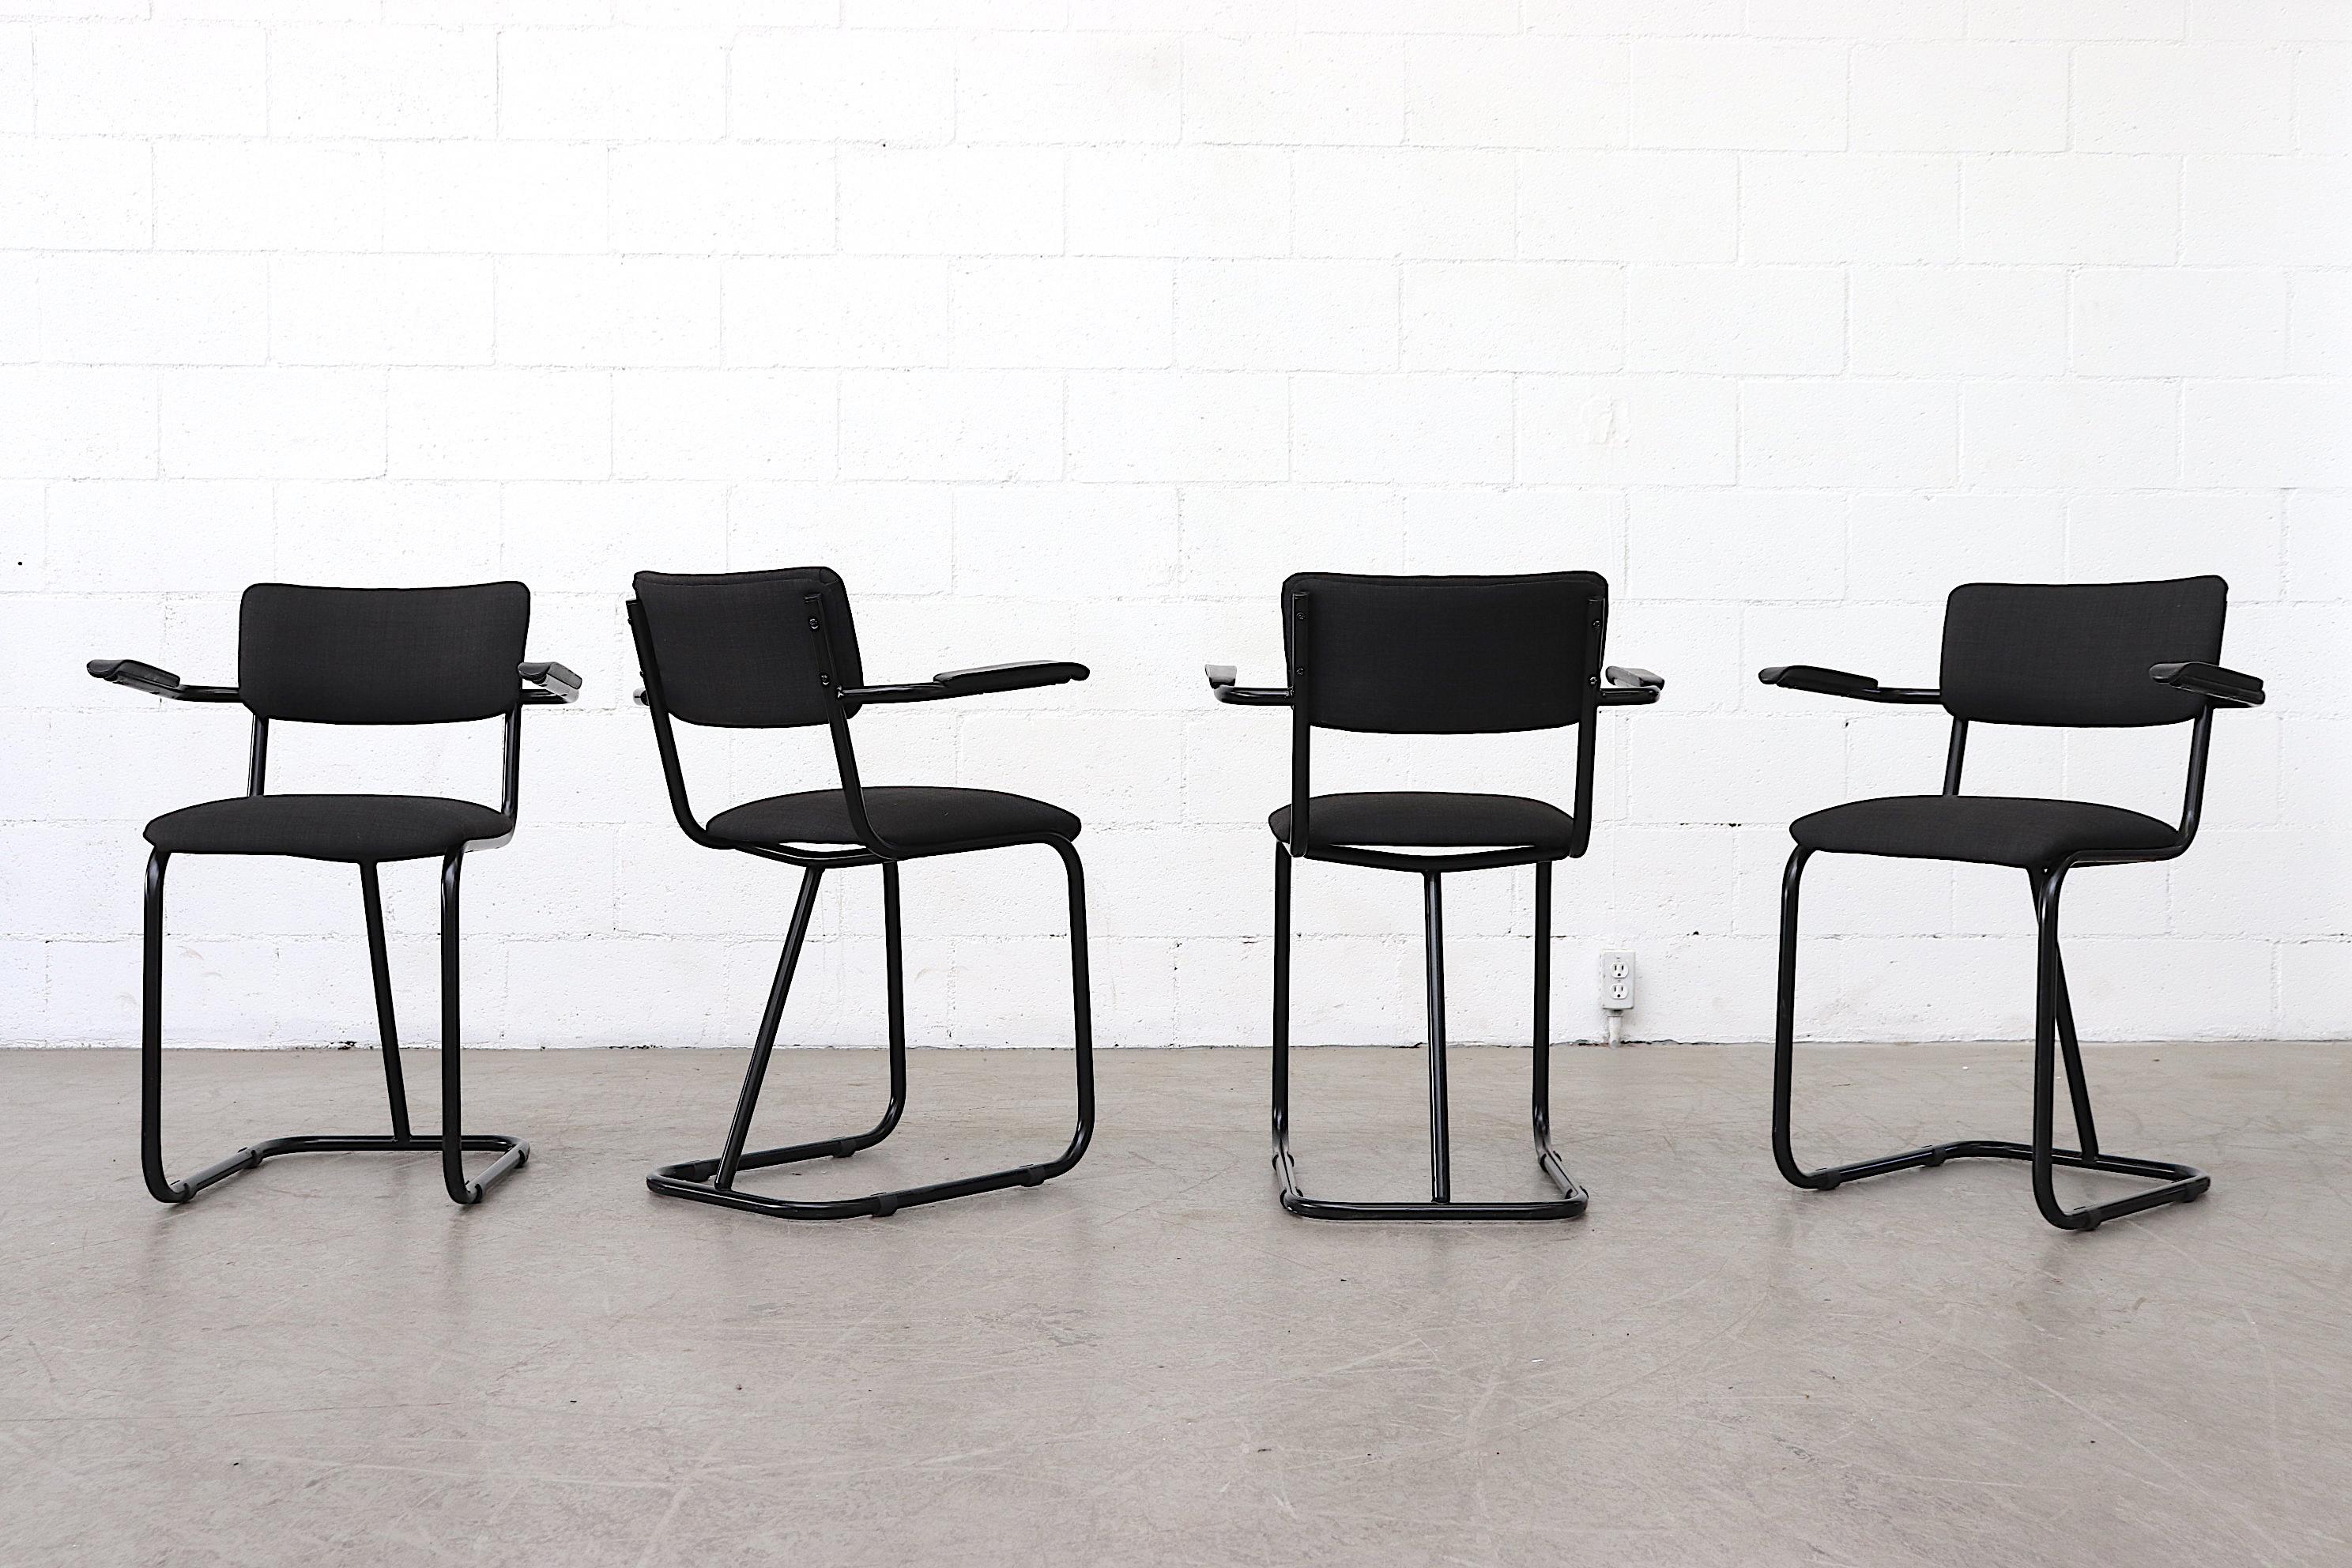 Mid-century, Fana Metaal produced chairs with upholstered tubular metal frames featuring a standout center support pole and acrylic armrests. The frames are in good condition with some age appropriate signs of wear. Set Price.